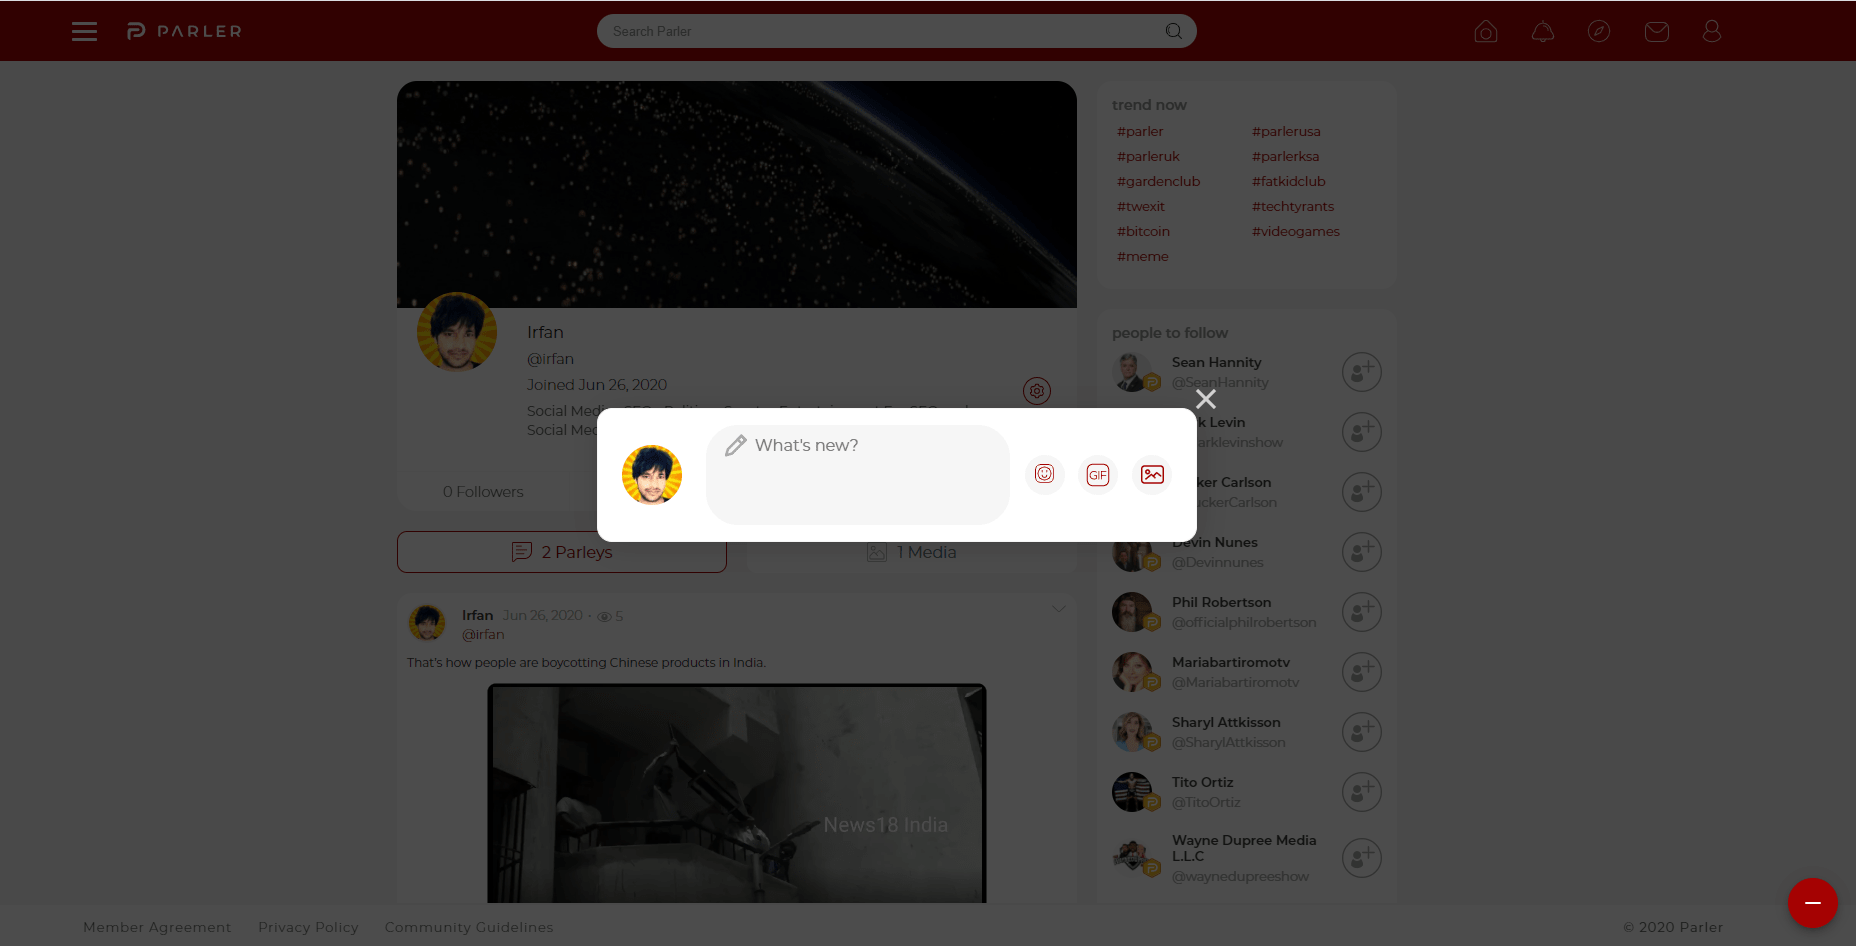 here you can create post on parler app